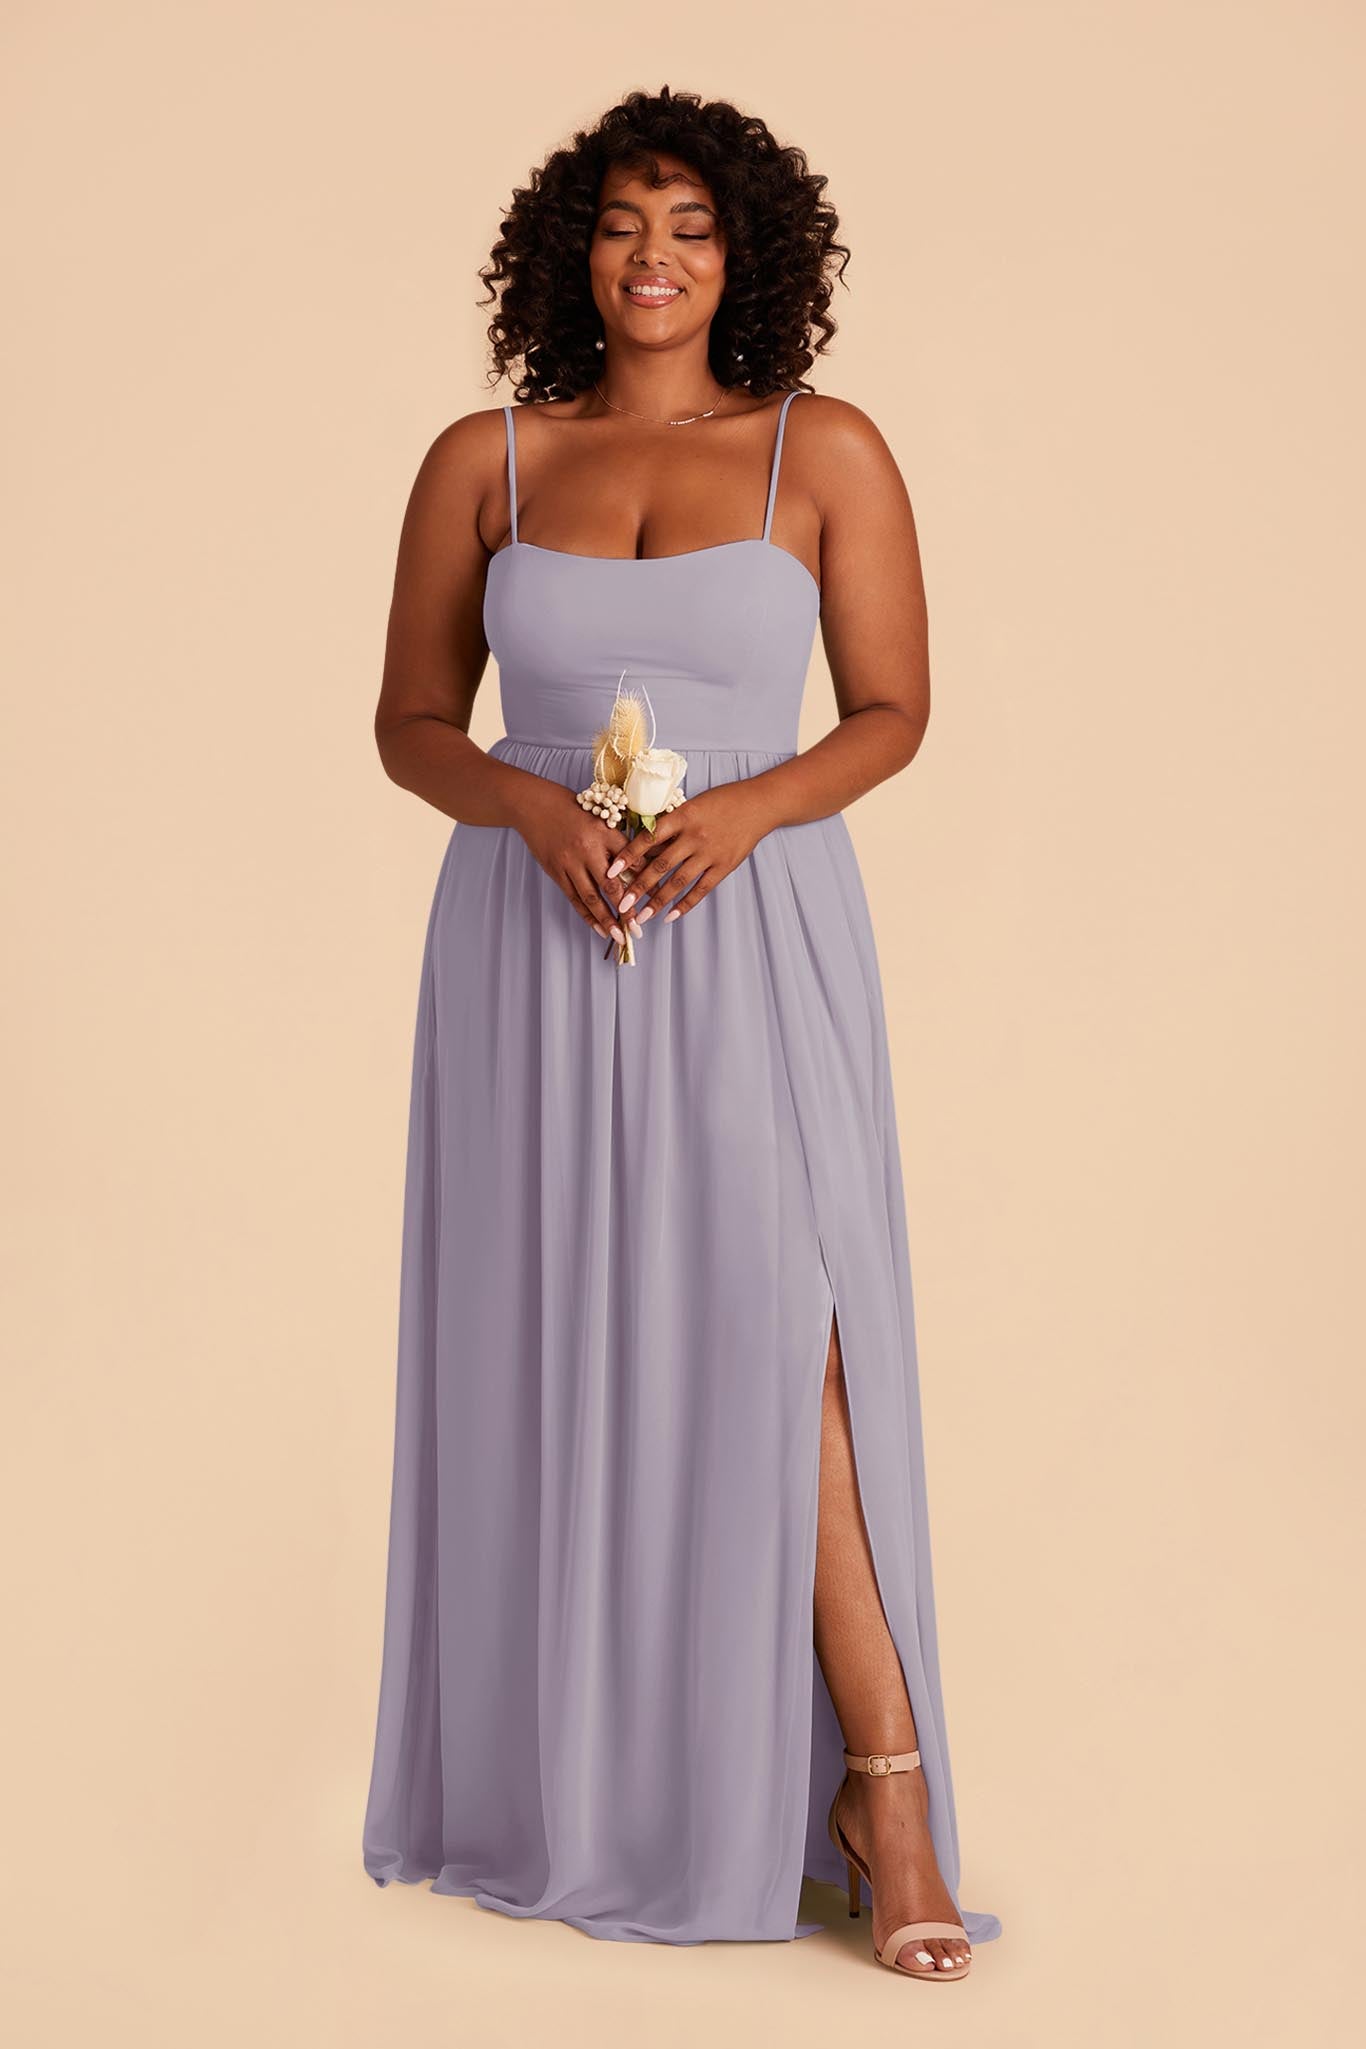 August Convertible Dress - Dusty Lilac